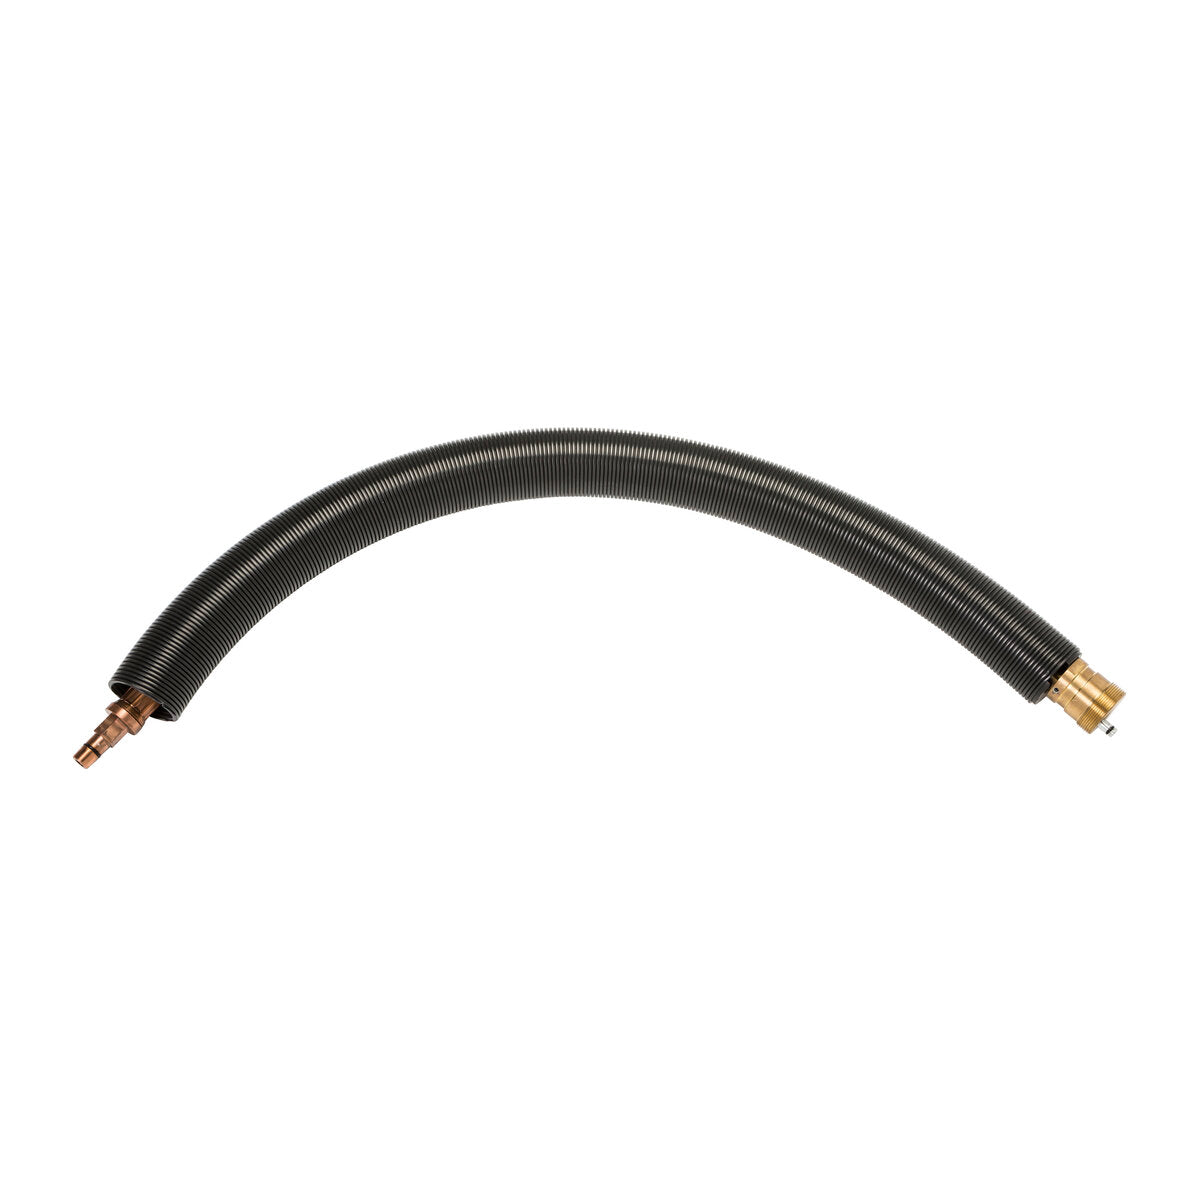 Lincoln Electric - AutoDrive® S Cable Fanuc 100iD - KP4305-100ID